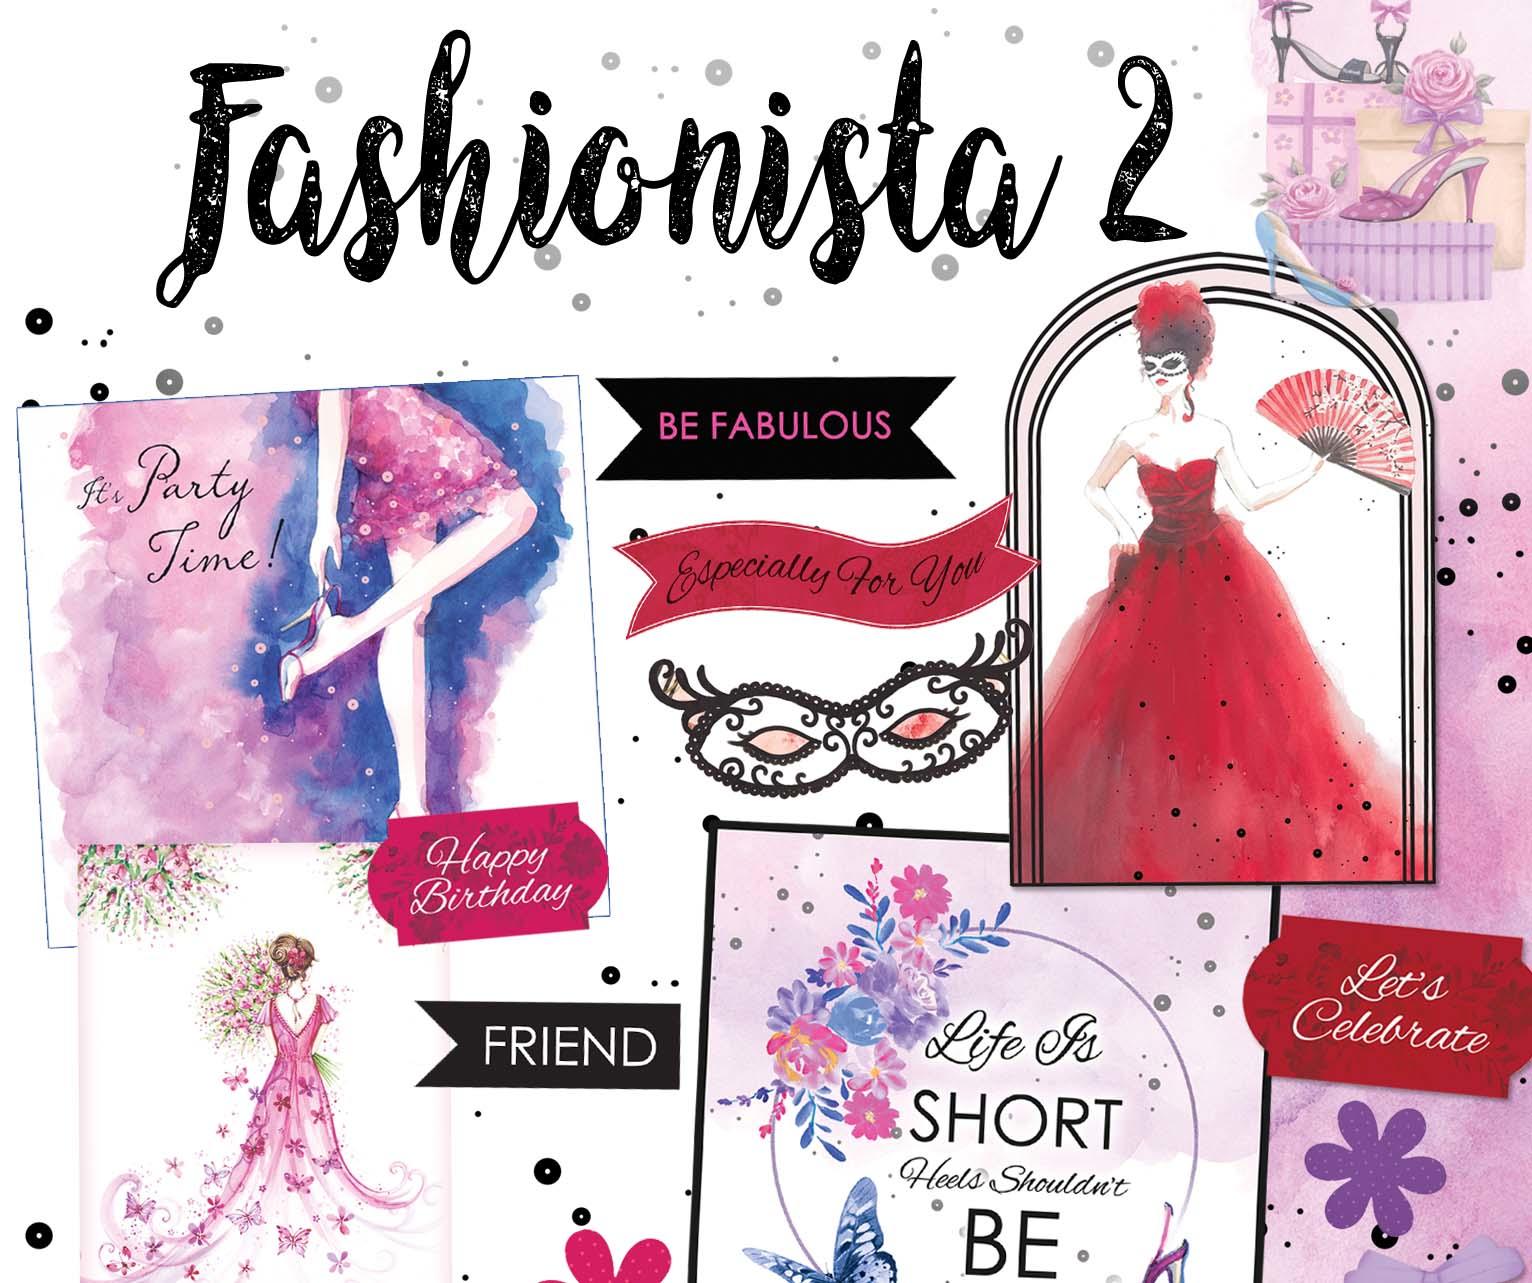 Fashionista 2 Papercrafting Collection Cd Rom Usb